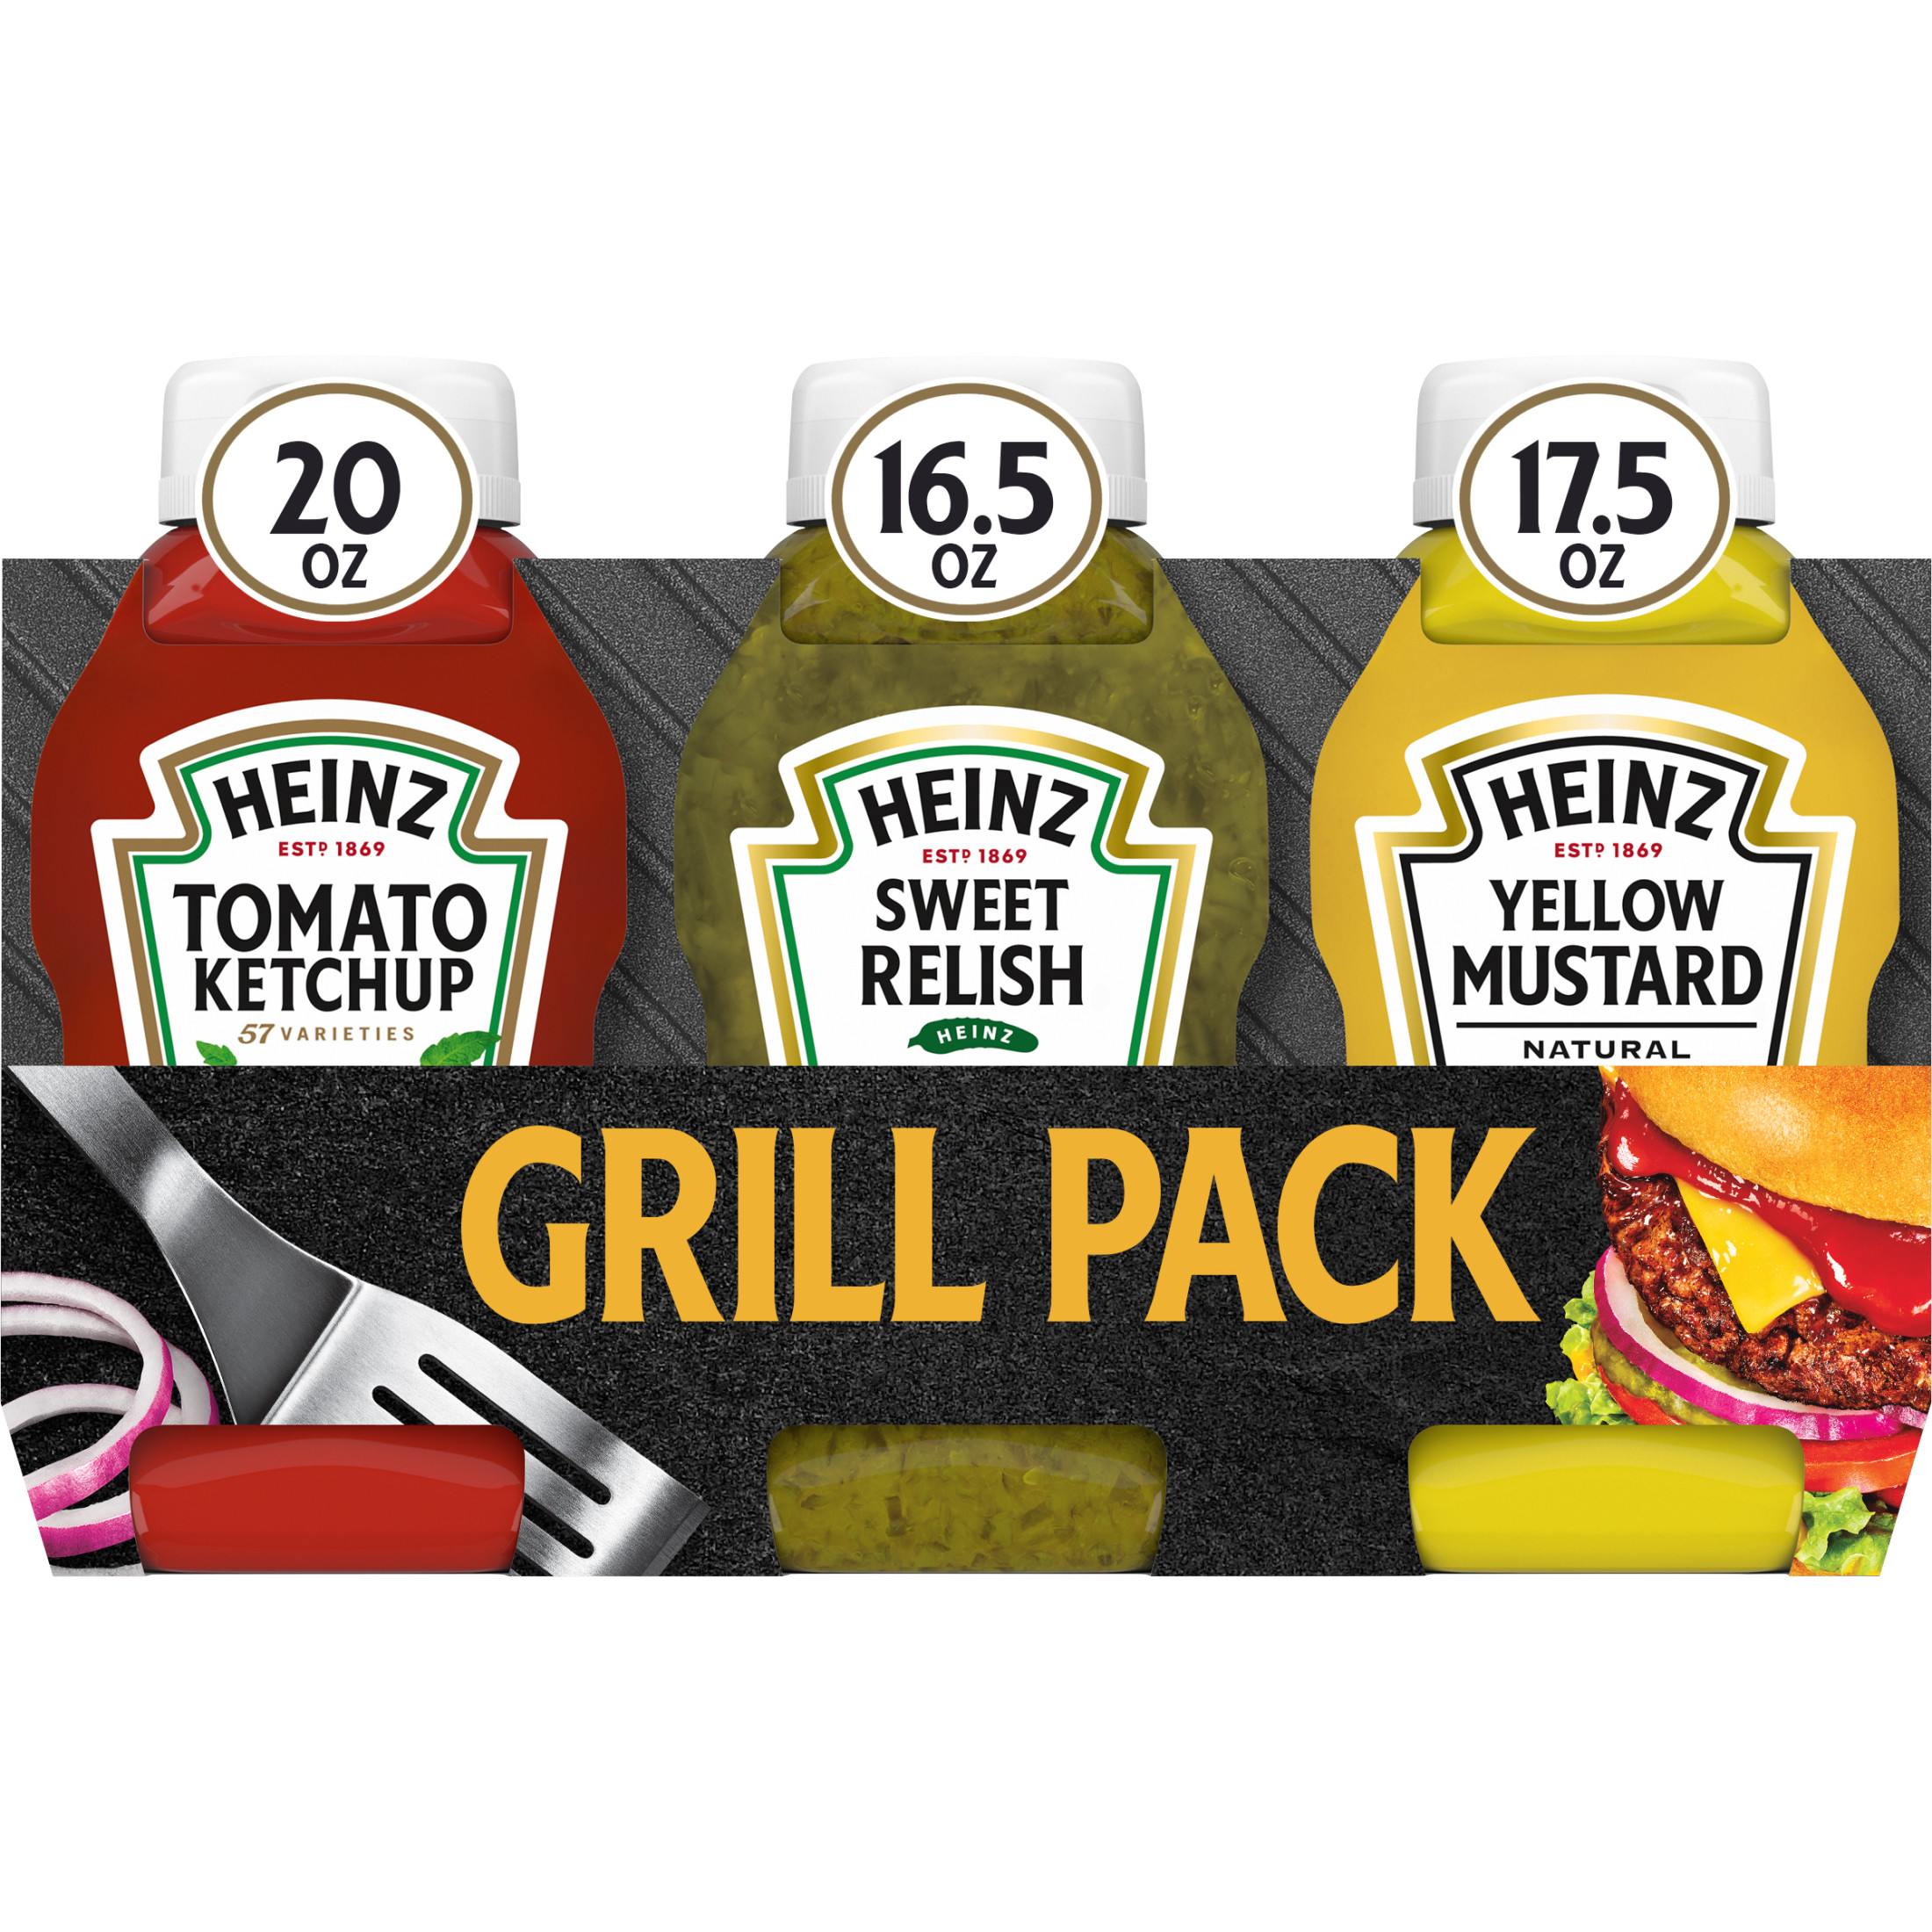 Heinz Tomato Ketchup, Sweet Relish & Yellow Mustard Grill Pack, 3 ct Pack - image 1 of 14